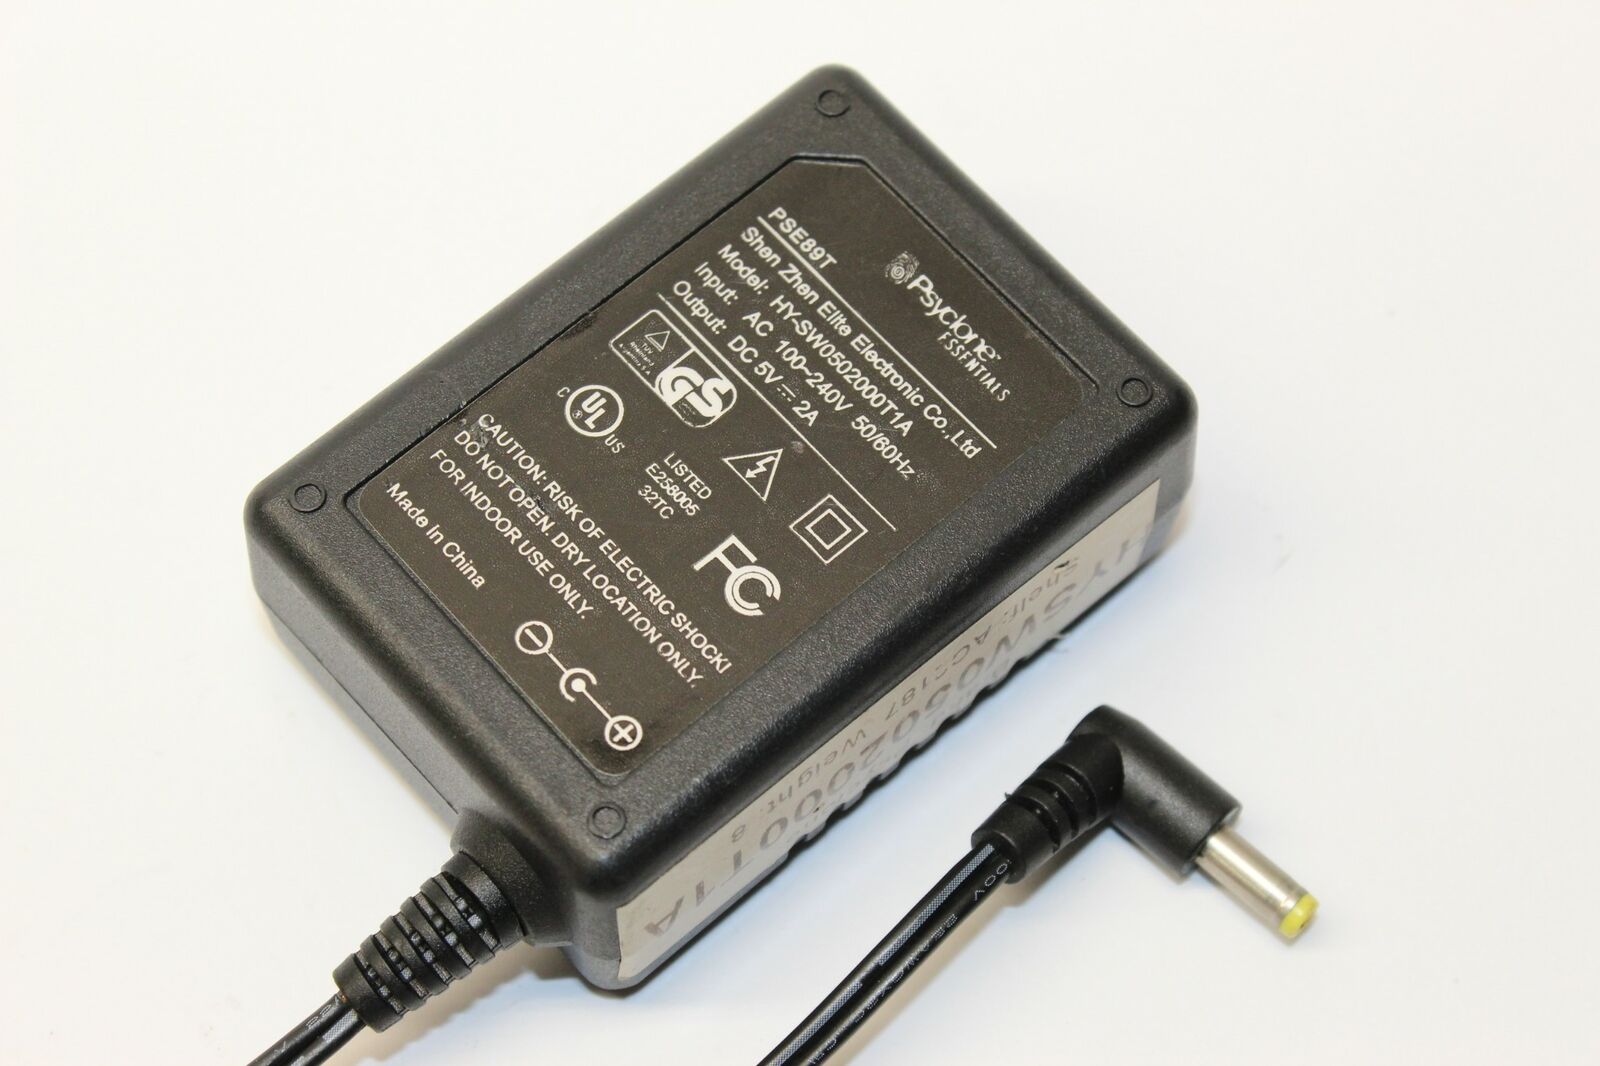 Psyclone HY-SW0502000T1A Power Supply Adapter Output DC 5V 2A Transformer Brand Psyclone Type Transformer MPN HY-SW0502